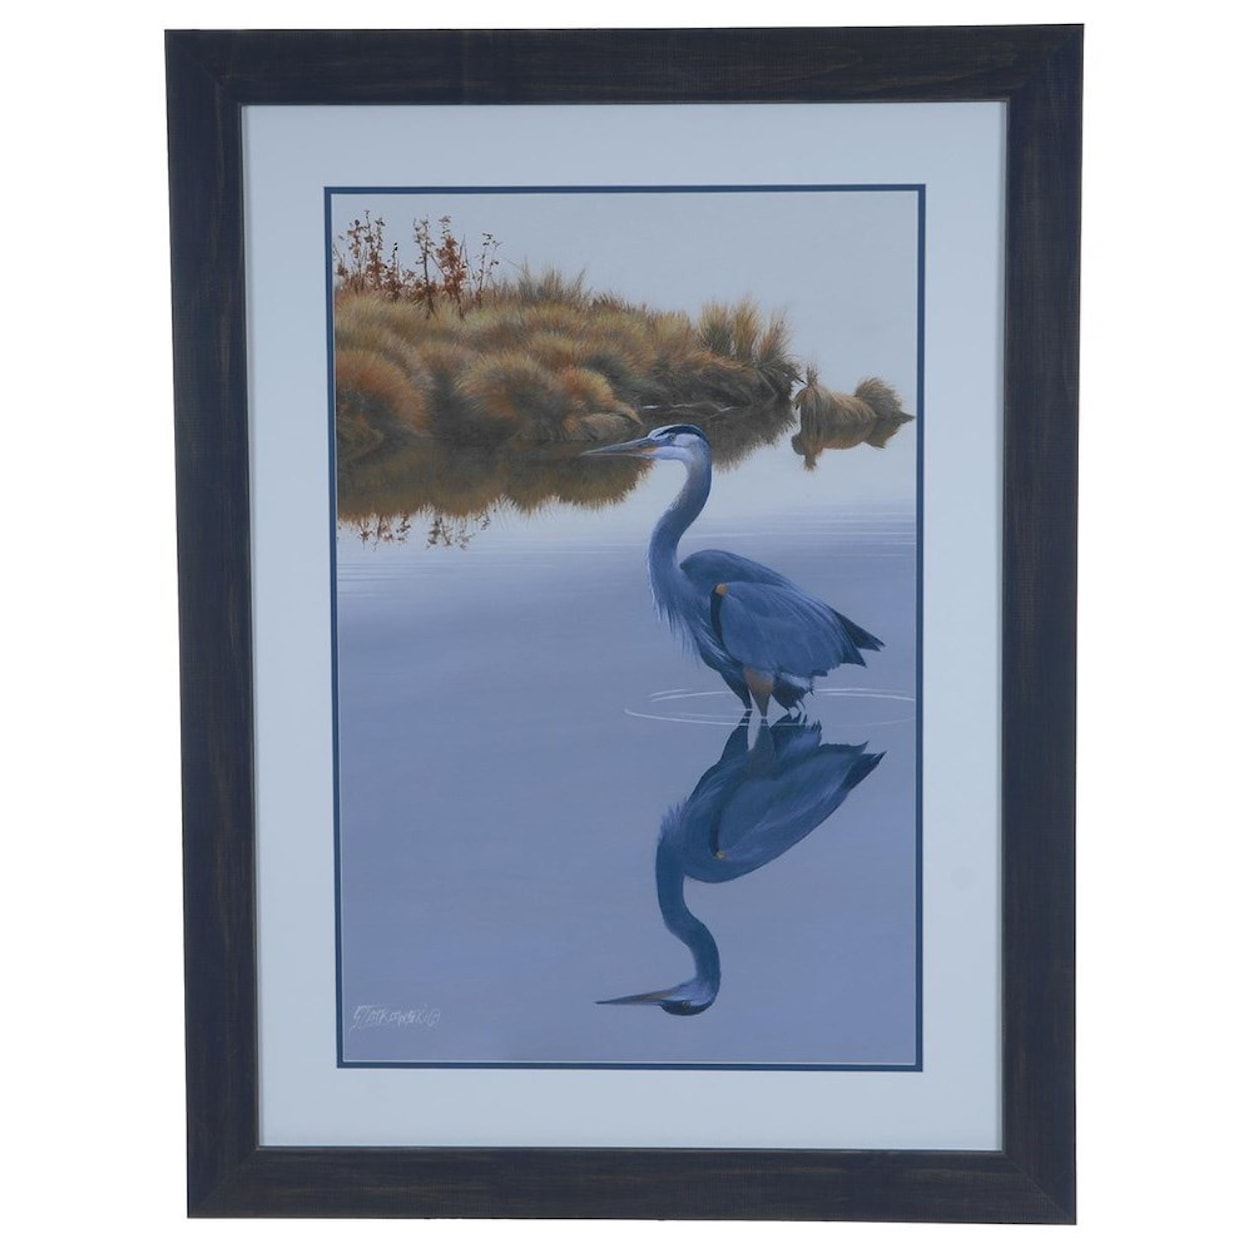 Crestview Collection Prints and Paintings Blackwater Reflection 2